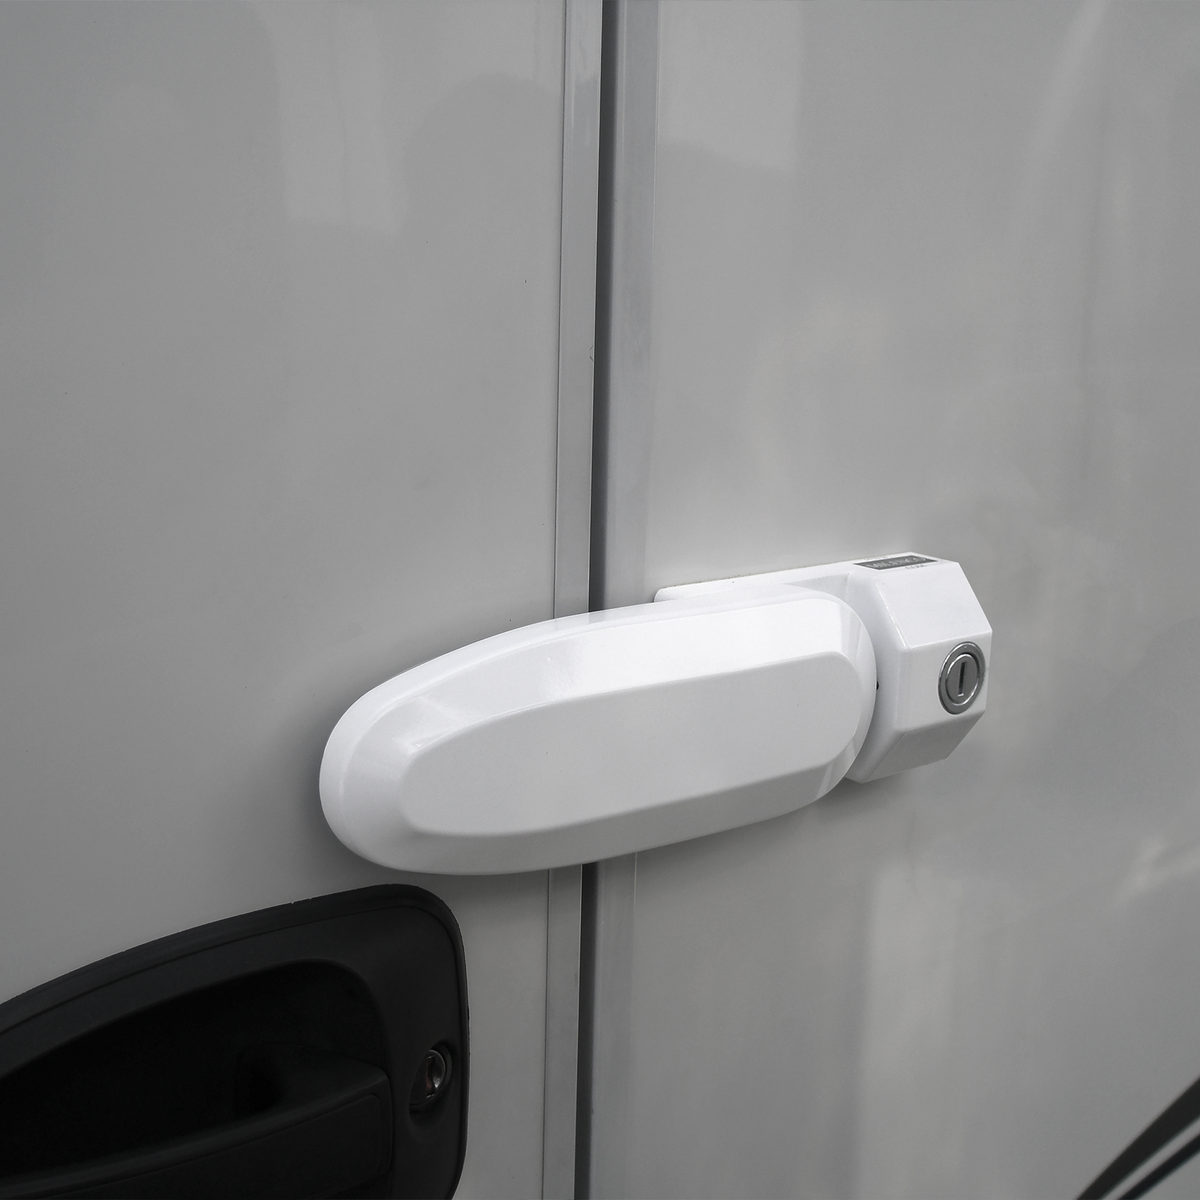 A Thule Inside-Out Lock G2 caravan lock attached to the door of a caravan.